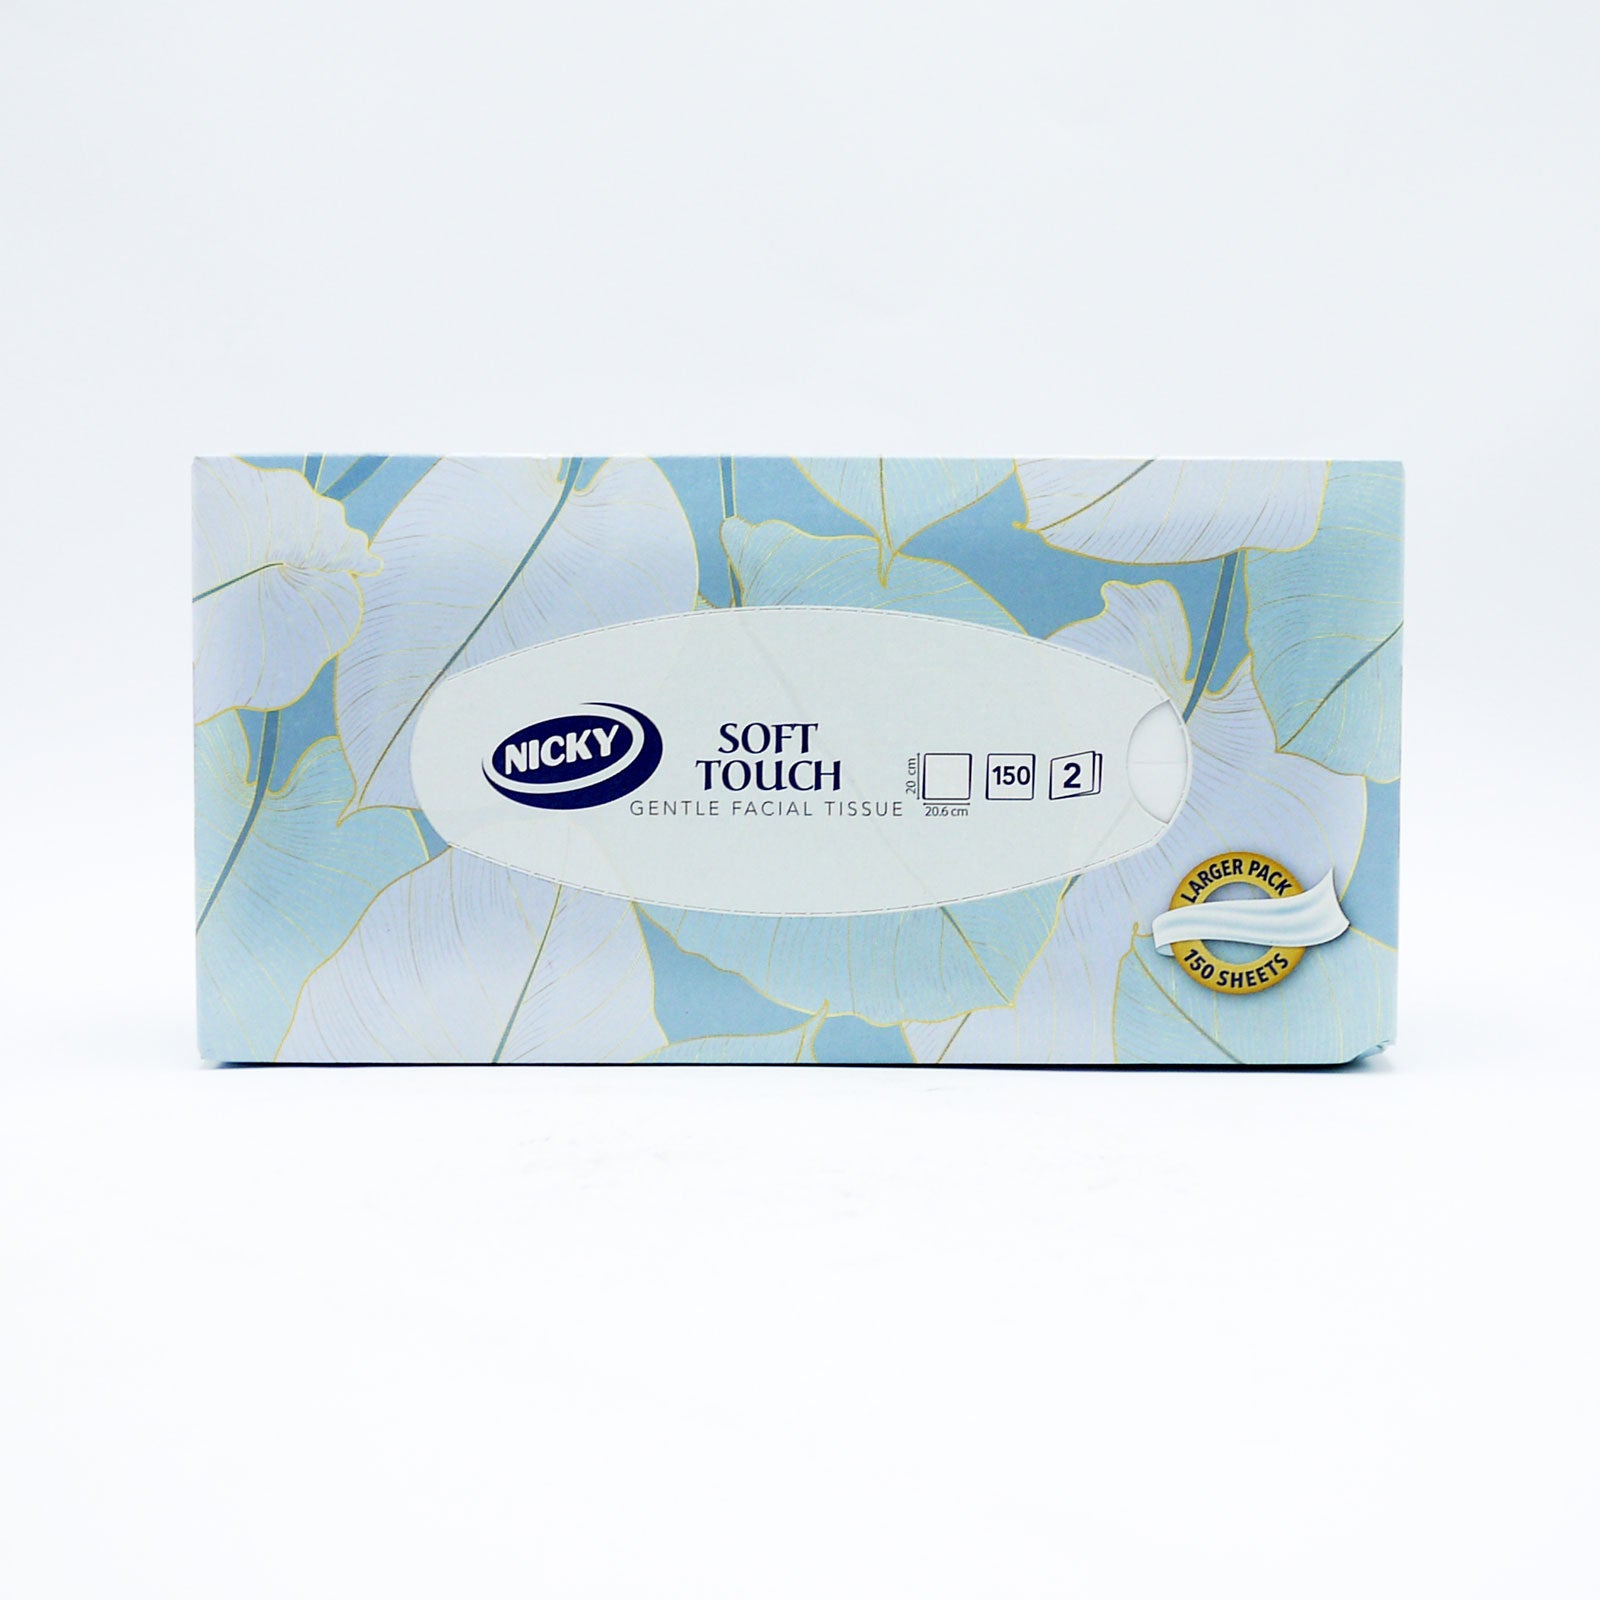 NICKY TISSUES SOFT TOUCH REGULAR 150shts